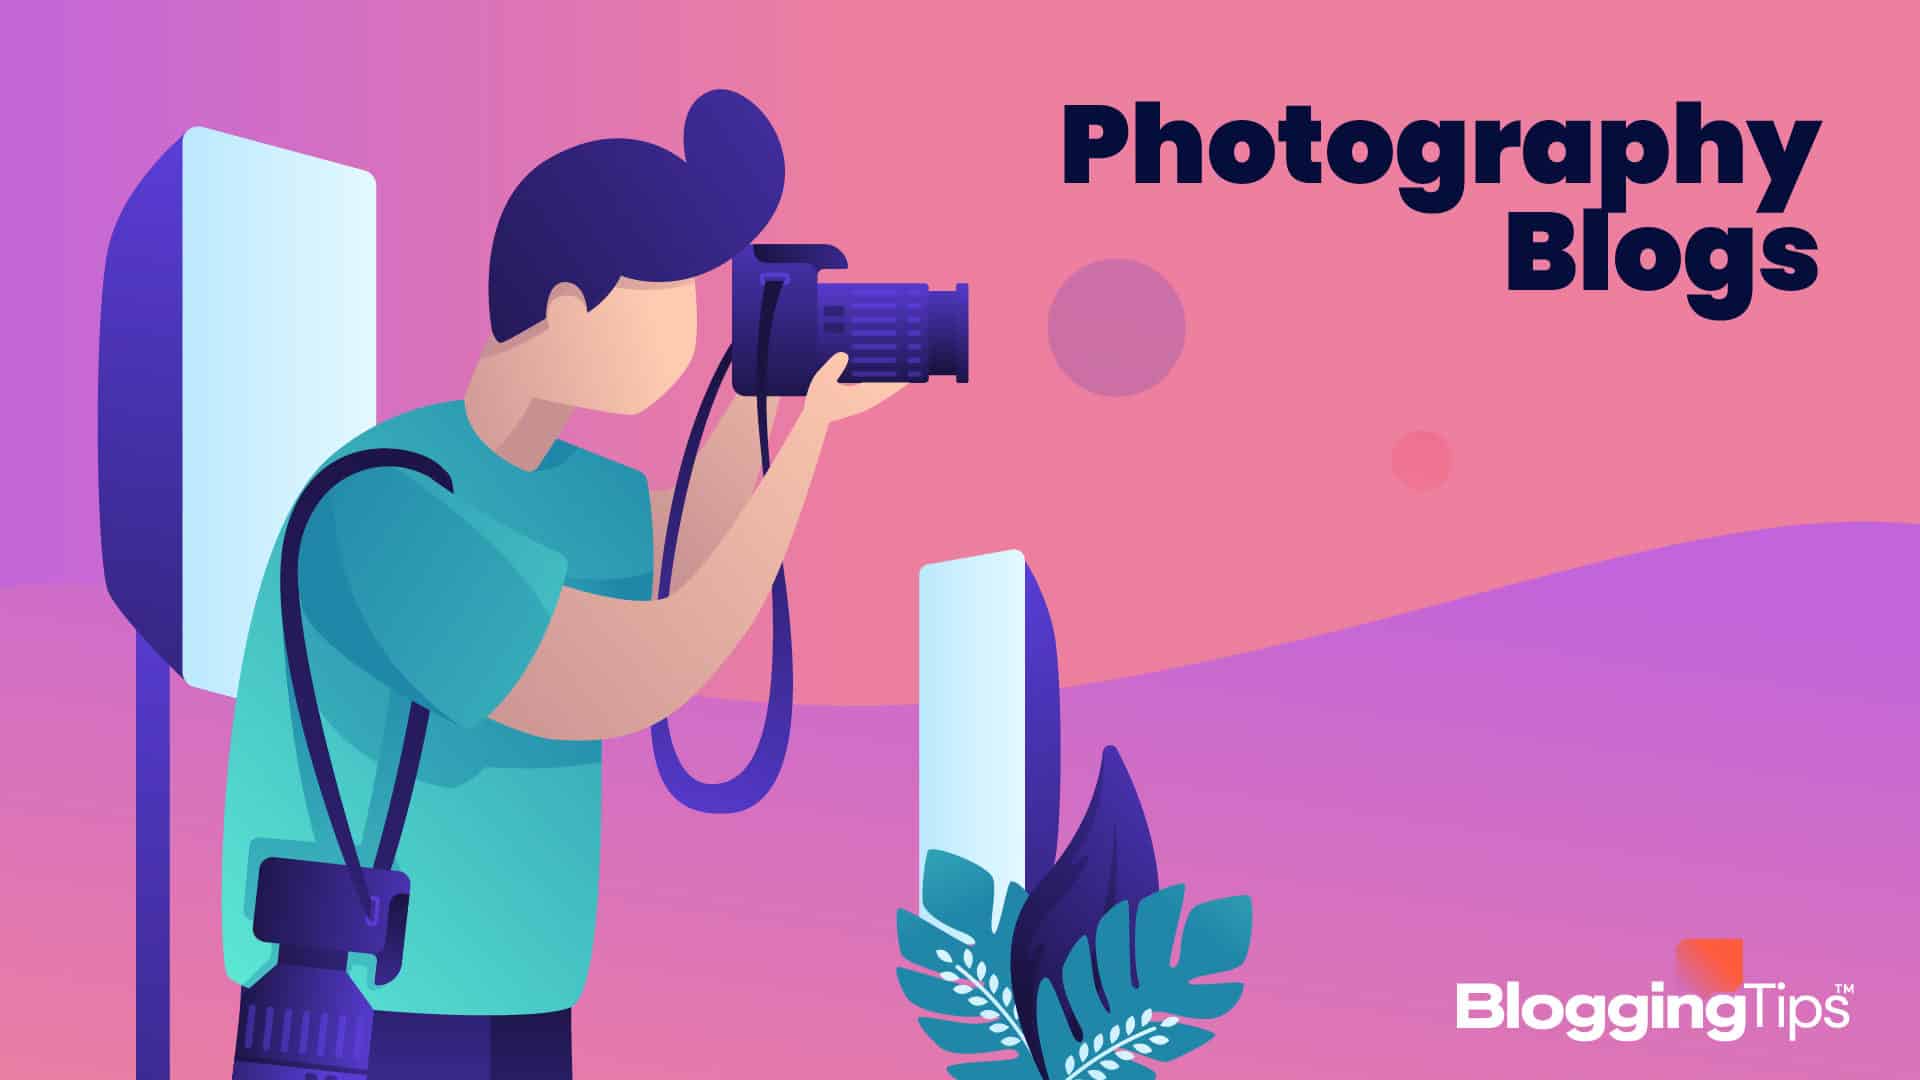 vector graphic showing an illustration of photography with the big block text 